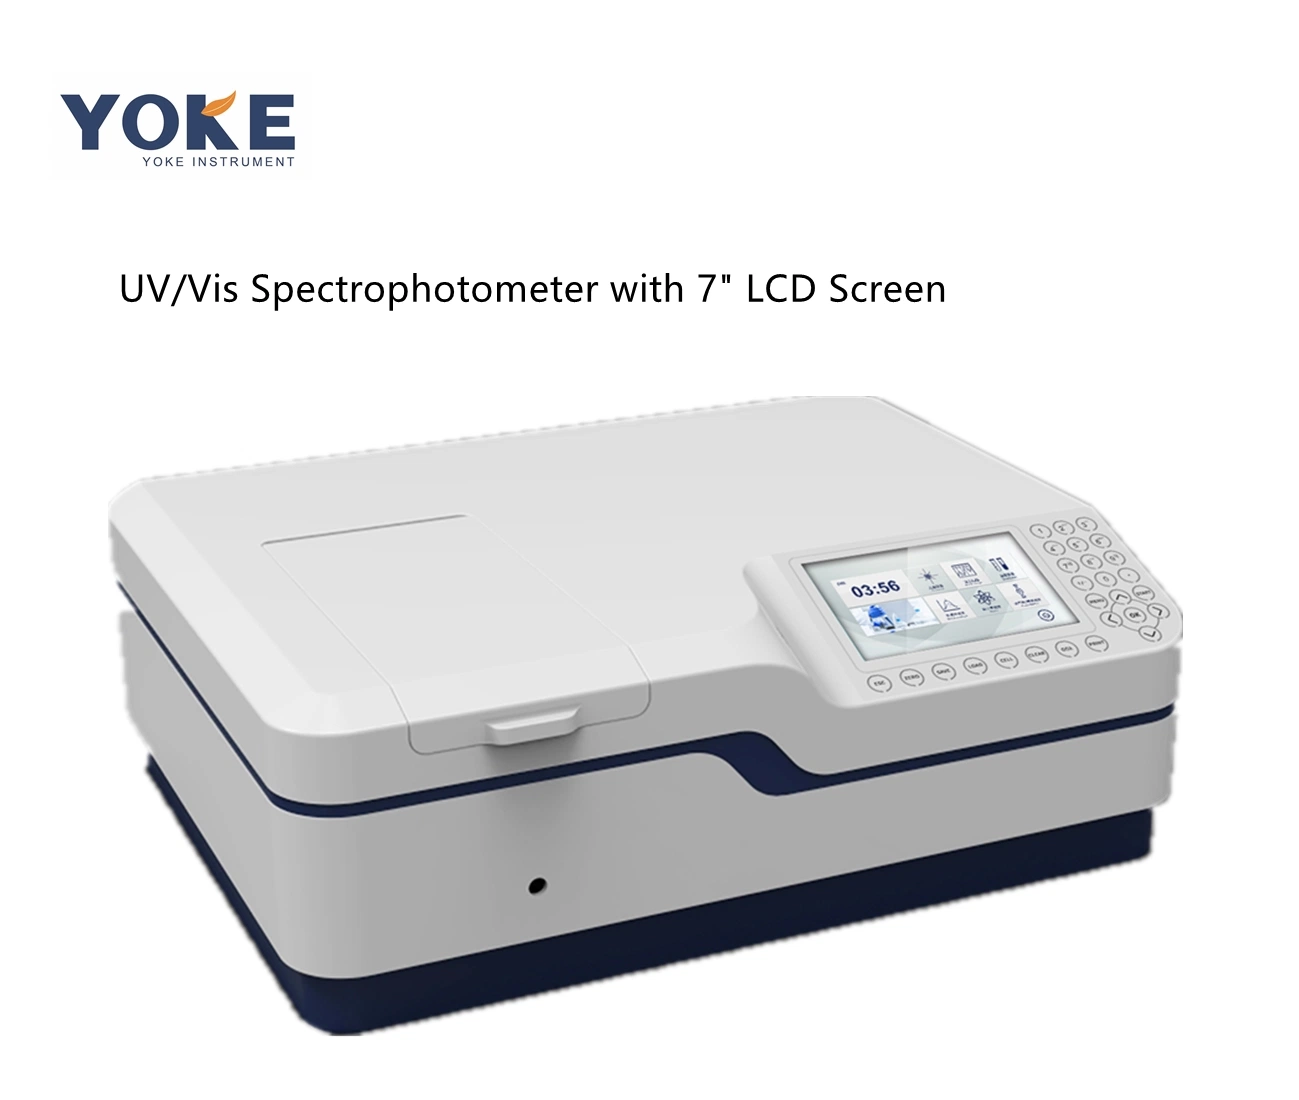 Laboratory Double Beam Scanning UV-Vis Spectrophotometer for Water Analysis K8000